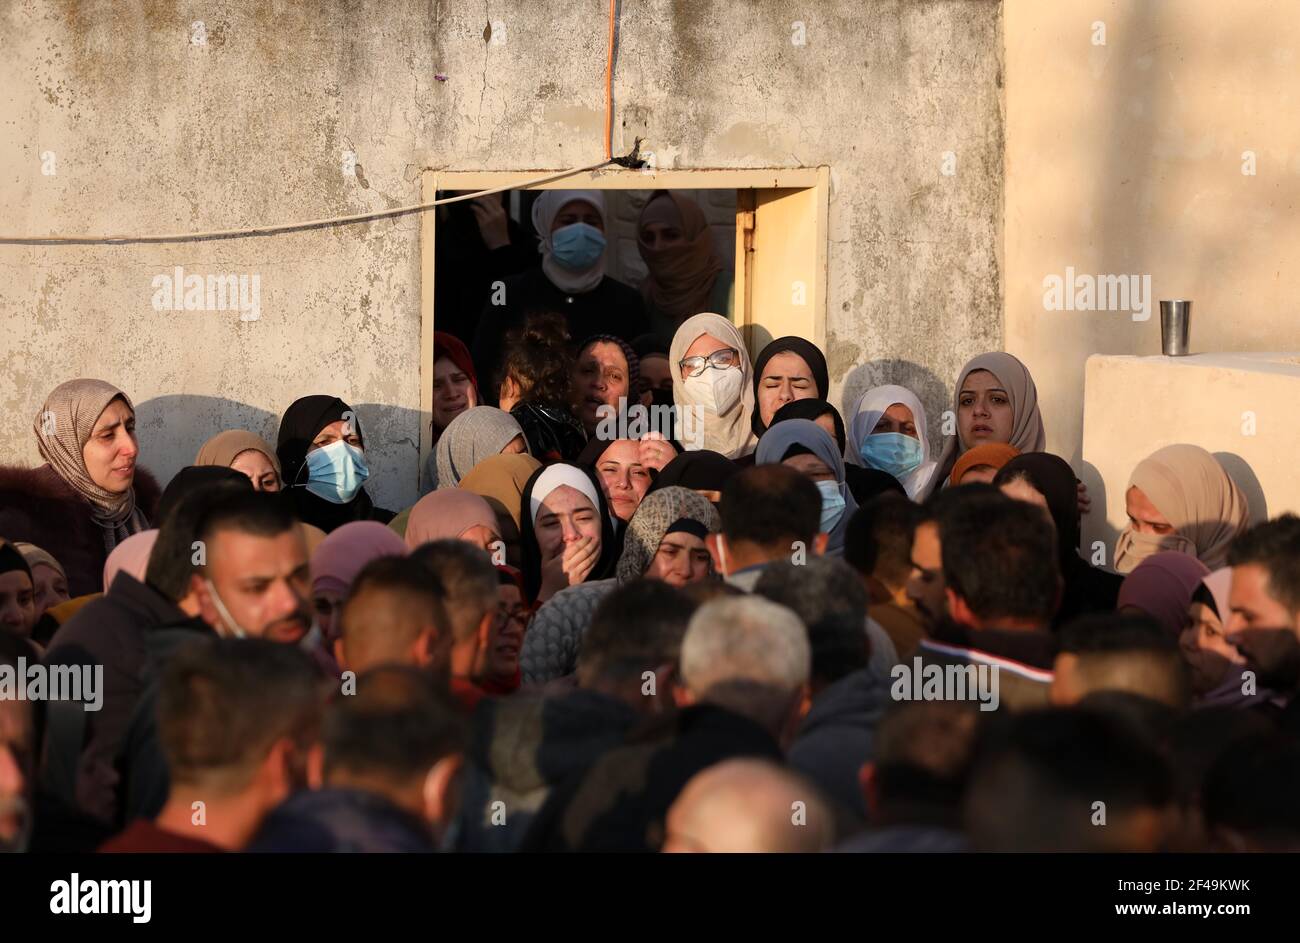 Nablus, Nablus. 19th Mar, 2021. Relatives of Palestinian Atef Yousef Hanaysha mourn during his funeral in the West Bank village of Beit Dajan, east of Nablus, on March 19, 2021. Atef Yousef Hanaysha was shot dead by Israeli soldiers on Friday afternoon in an anti-settlement rally near Beit Dajan village, medics said. Credit: Ayman Nobani/Xinhua/Alamy Live News Stock Photo